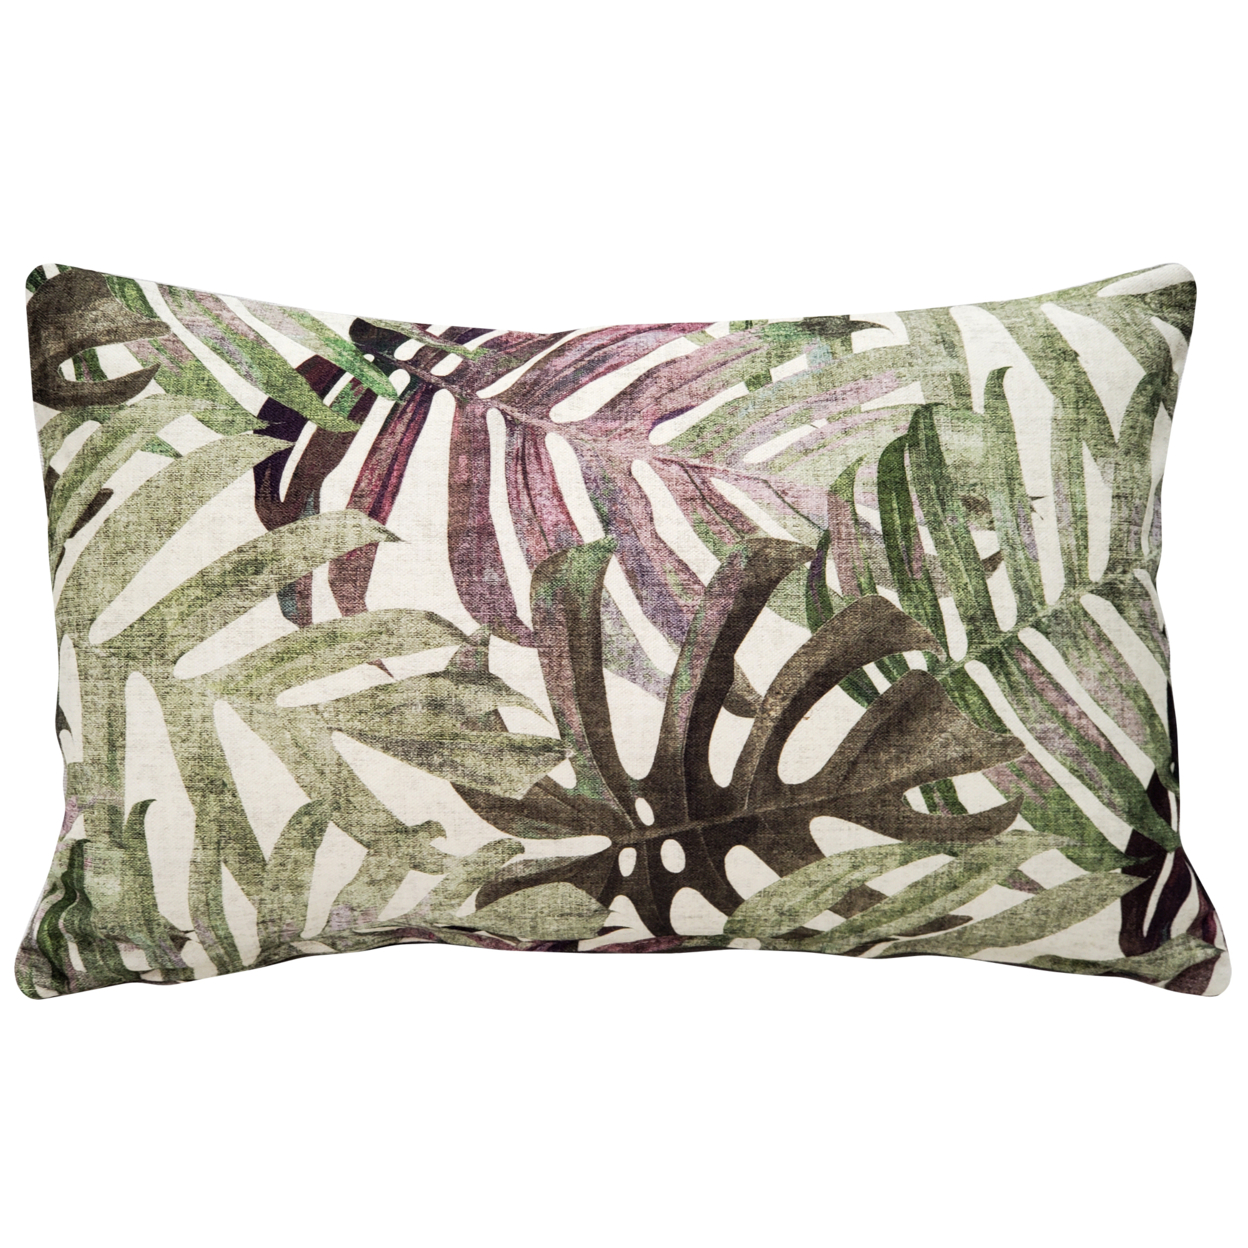 Pattaya Purple Palm Throw Pillow 12x20 Inches Square, Complete Pillow With Polyfill Pillow Insert